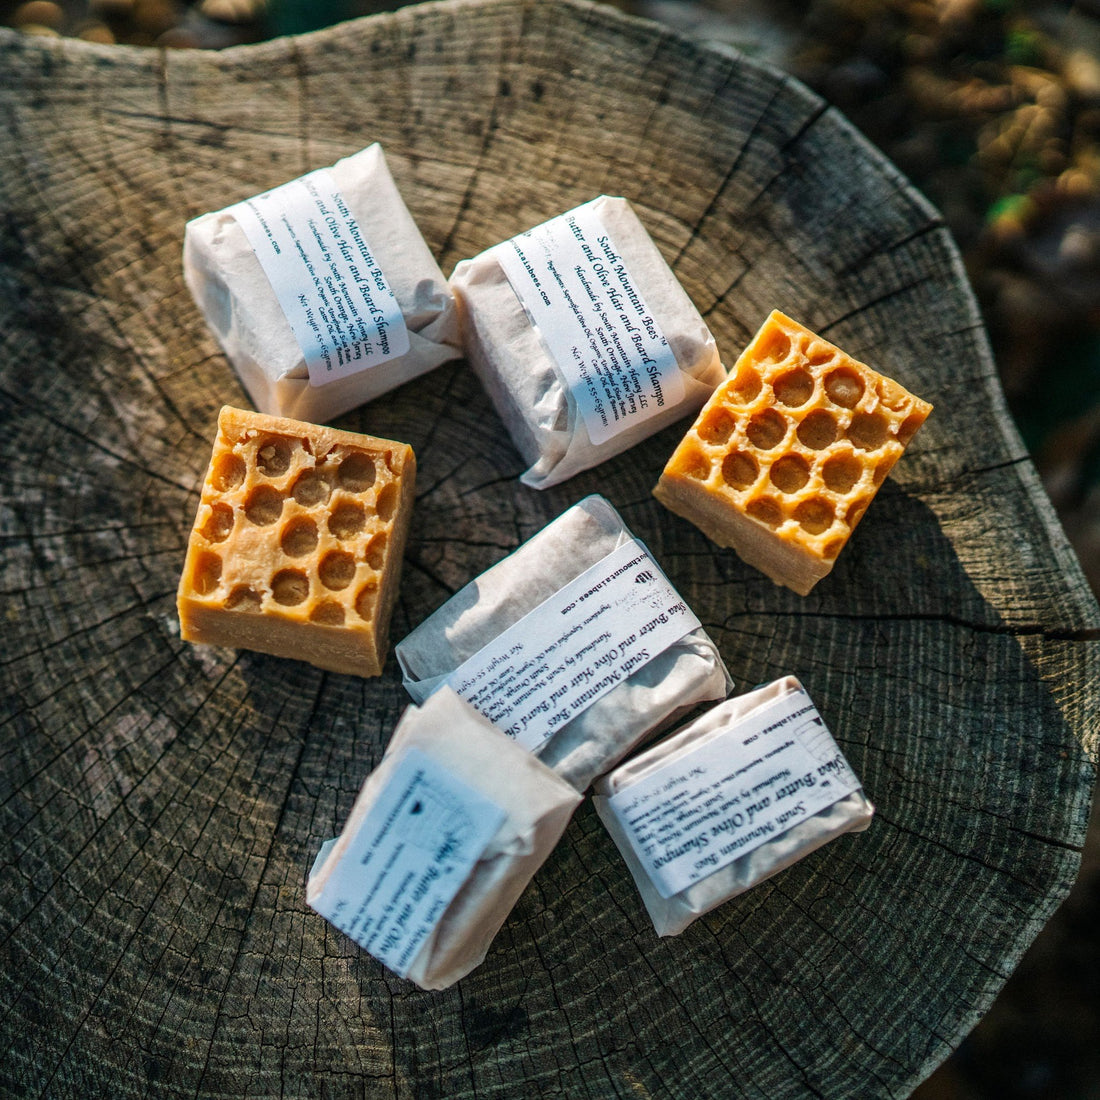 Handcrafted solid shampoo bars on a tree stump in the golden glow of the afternoon sunlight.